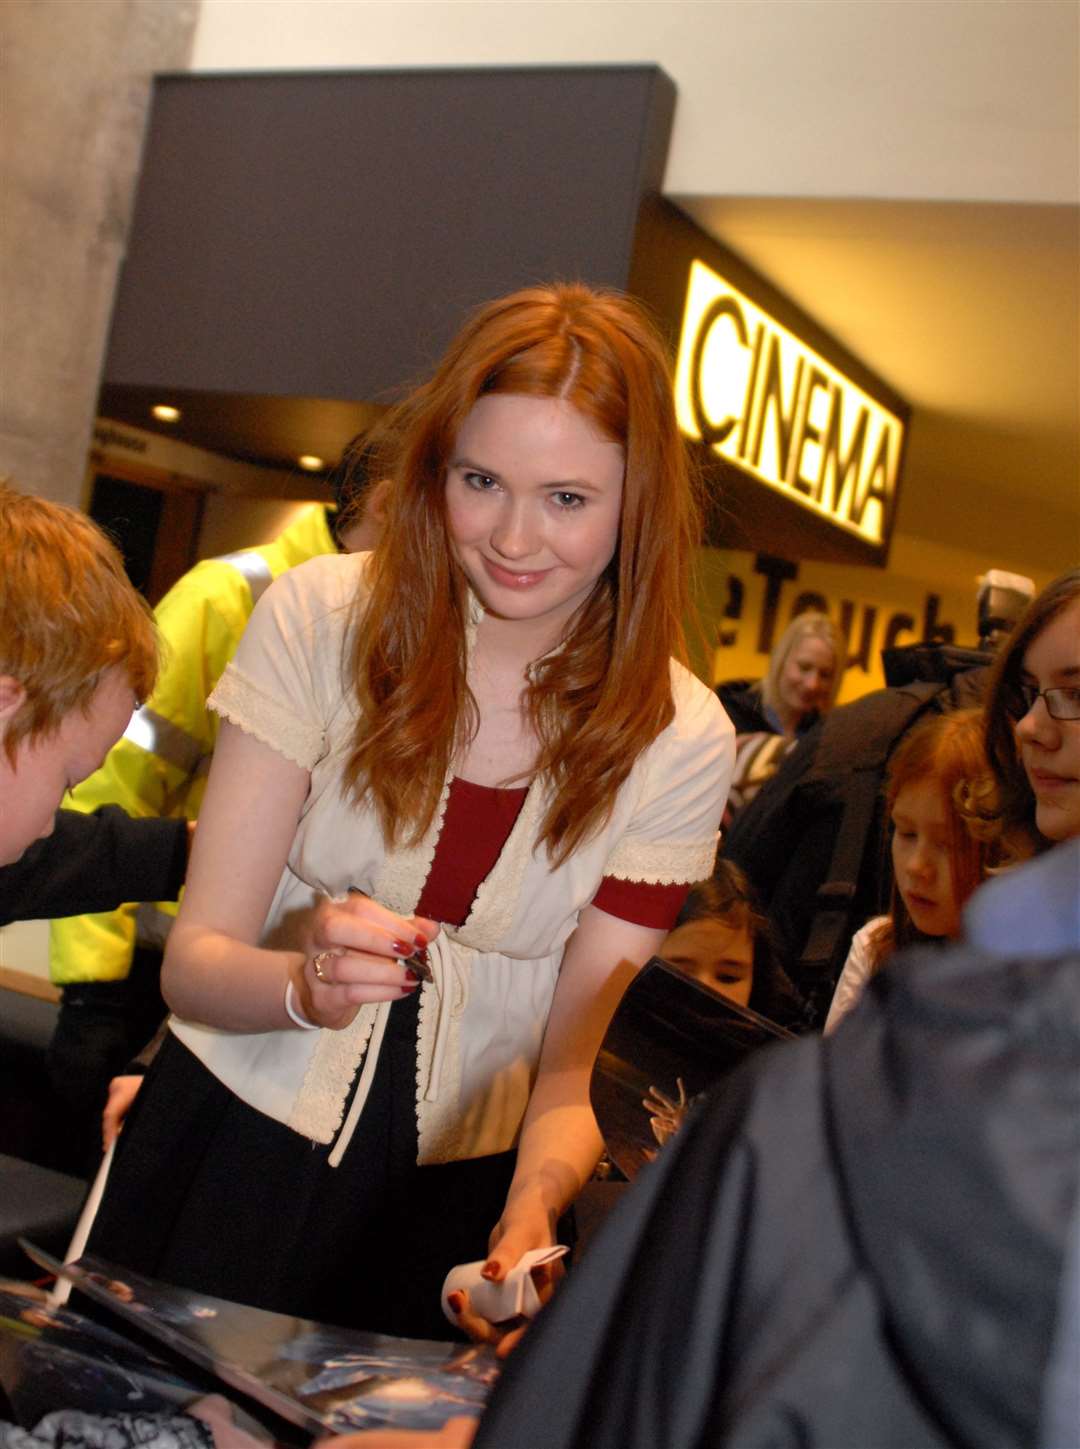 Karen Gillan meets Inverness fans after the screening at Eden Court of the first episode of Doctor Who with the young actress making her debut as Amy Pond. Picture: HNM